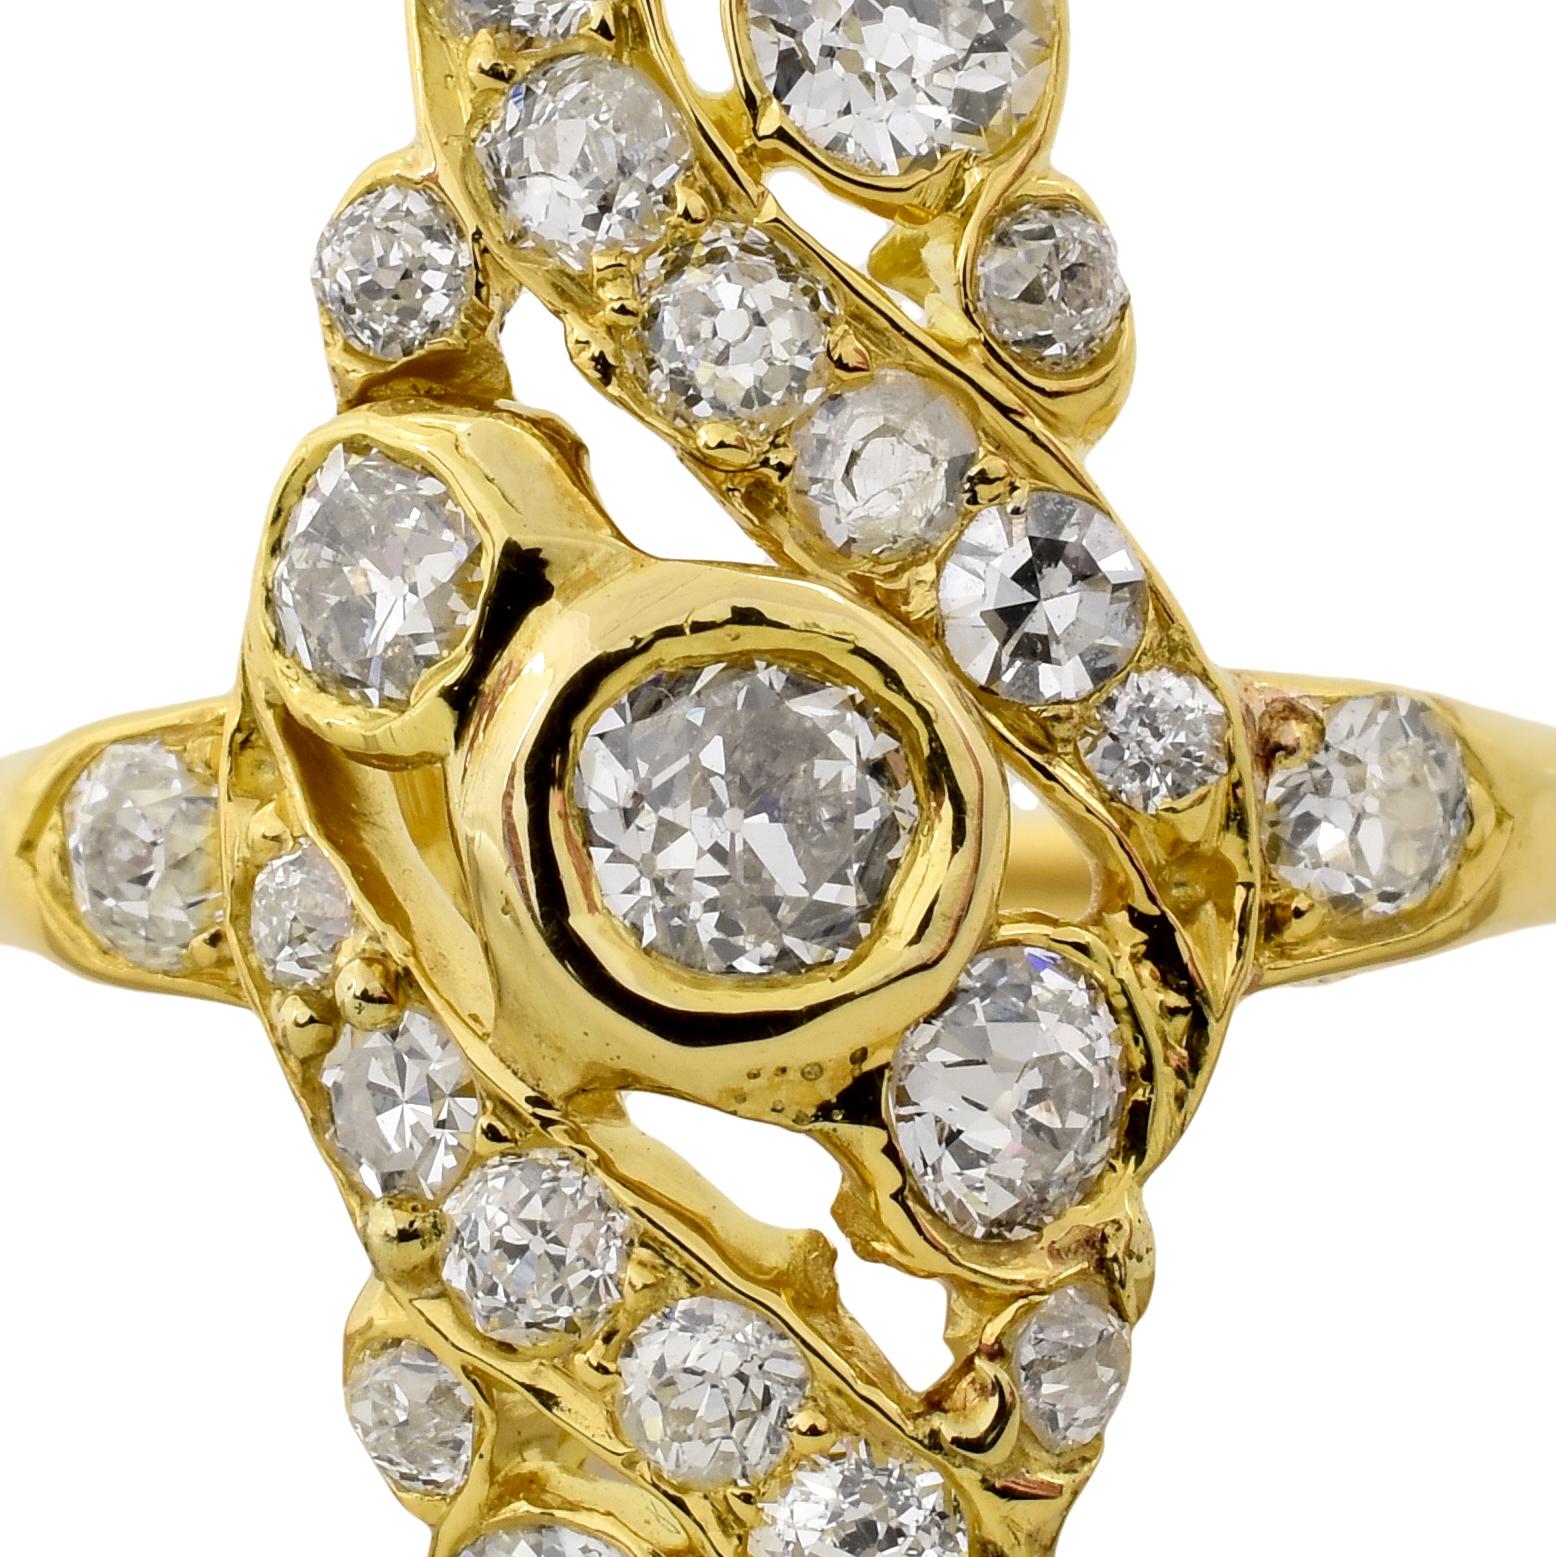 A navette shaped ring in 18k yellow gold that features 1.50cts of old cut diamonds.